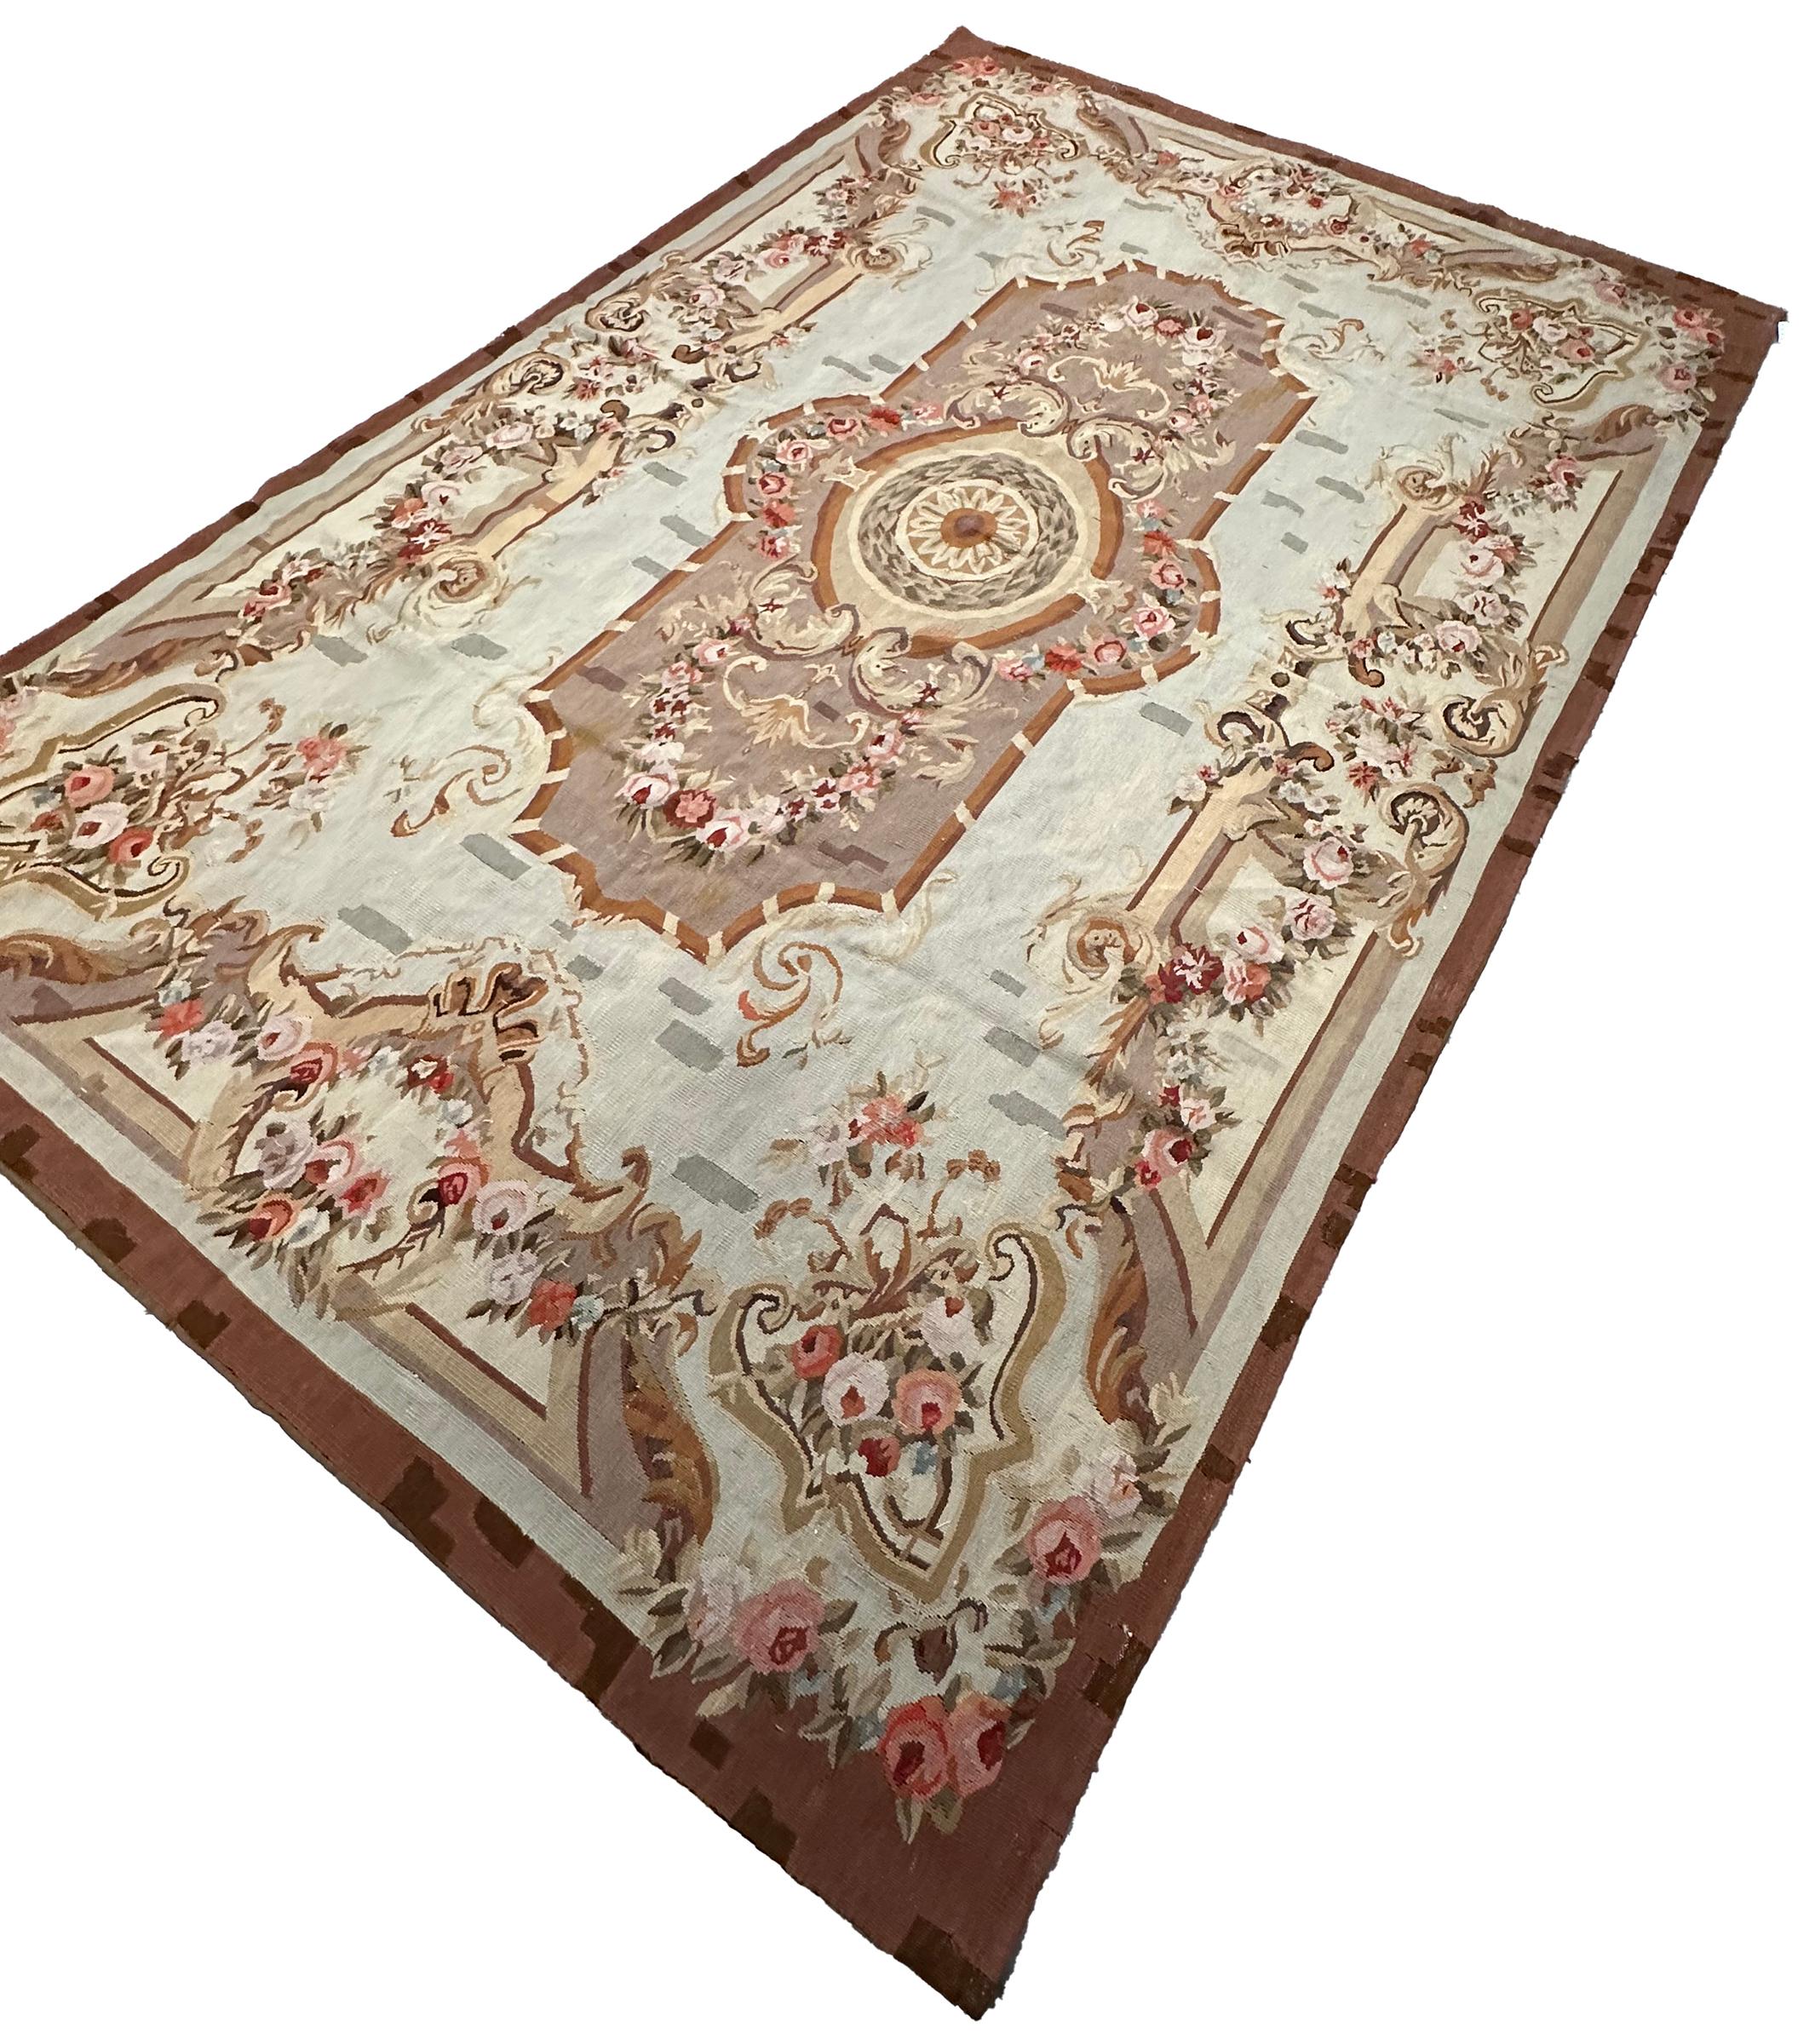 Wool Antique French Aubusson Rug Hand Woven 1880 6x7ft Rare Design 178cm x 206cm For Sale